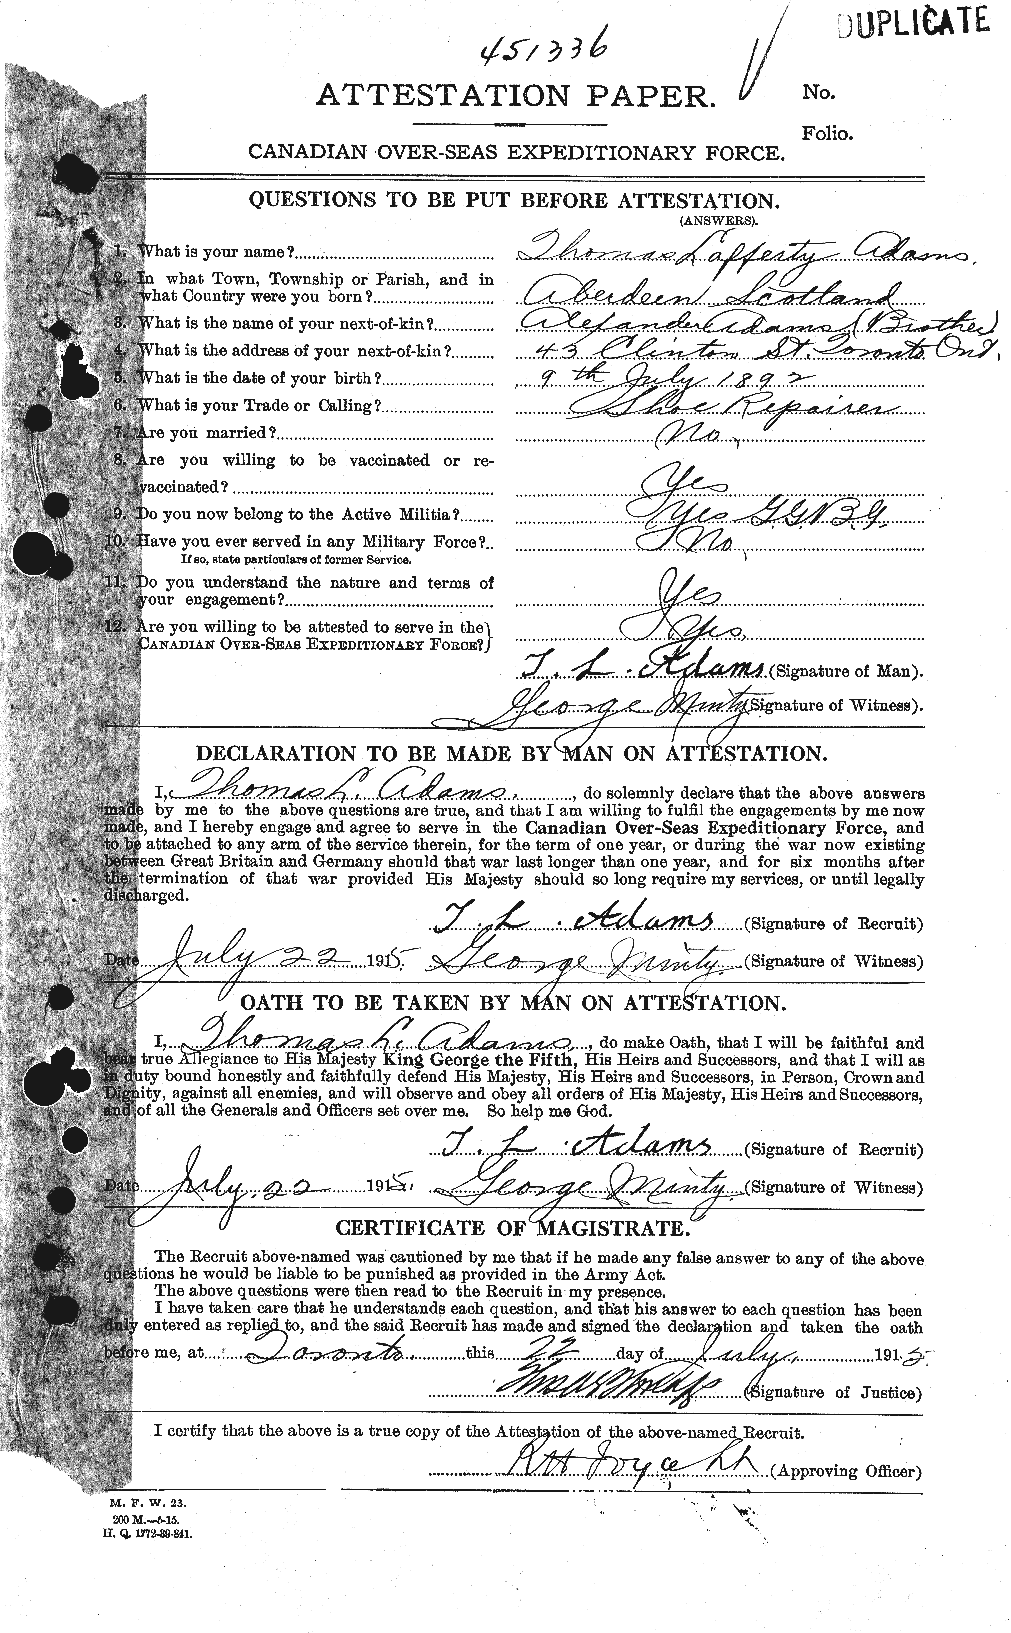 Personnel Records of the First World War - CEF 202177a